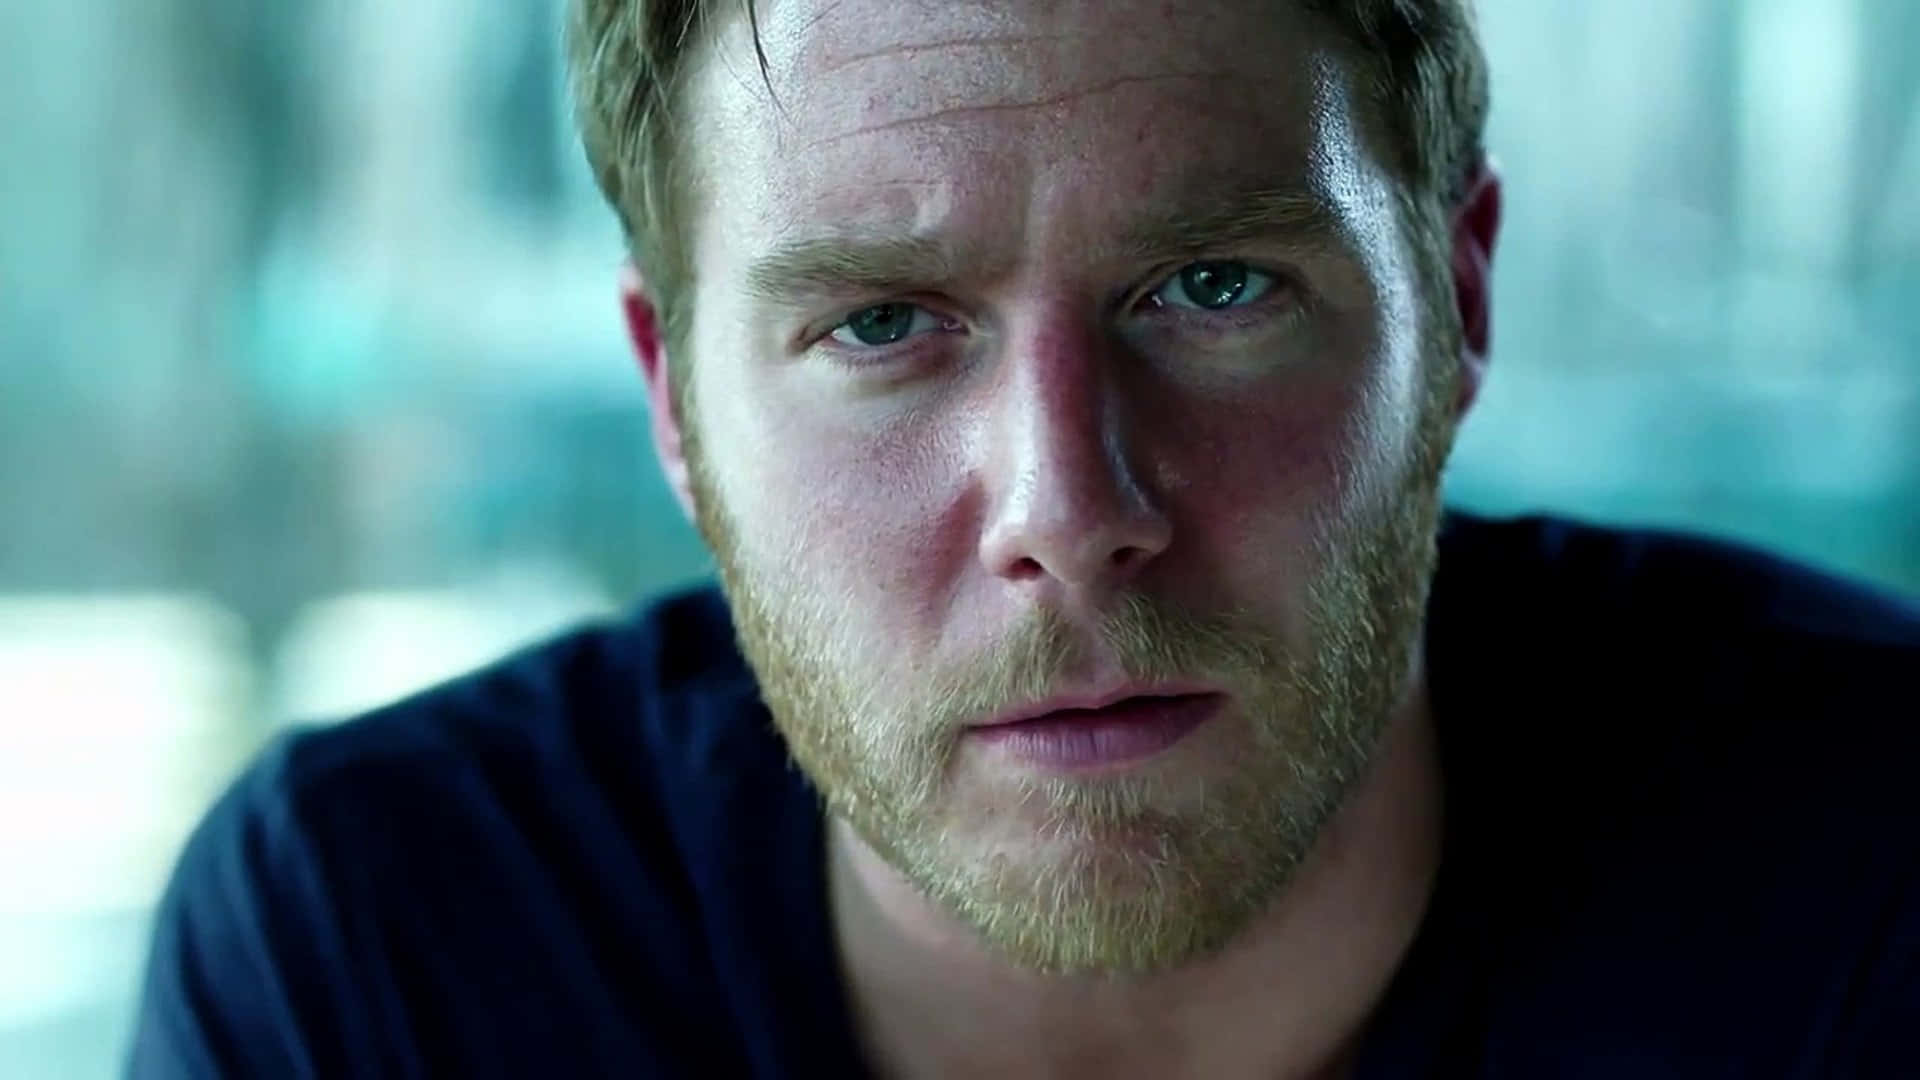 Brian Finch From Limitless Wallpaper